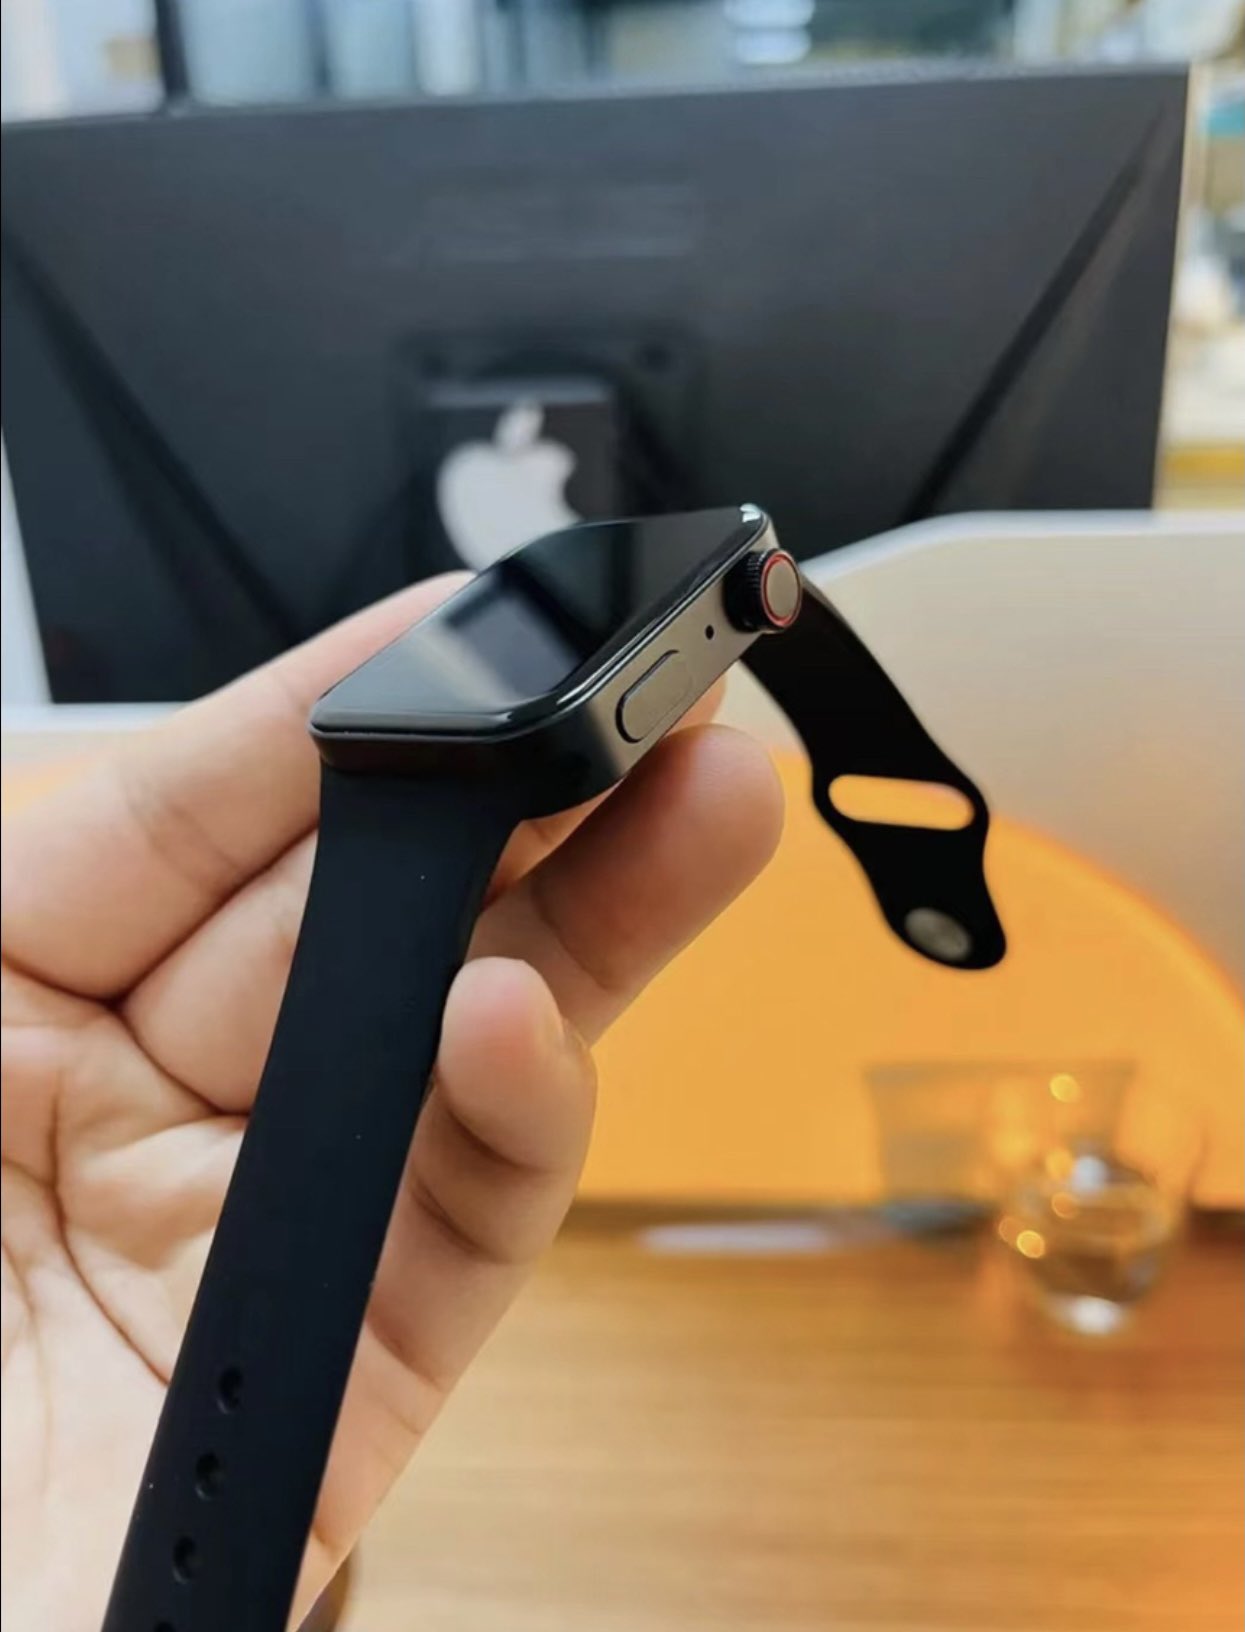 Apple Watch Series 7 Clone Already Being Sold in China [Photos]